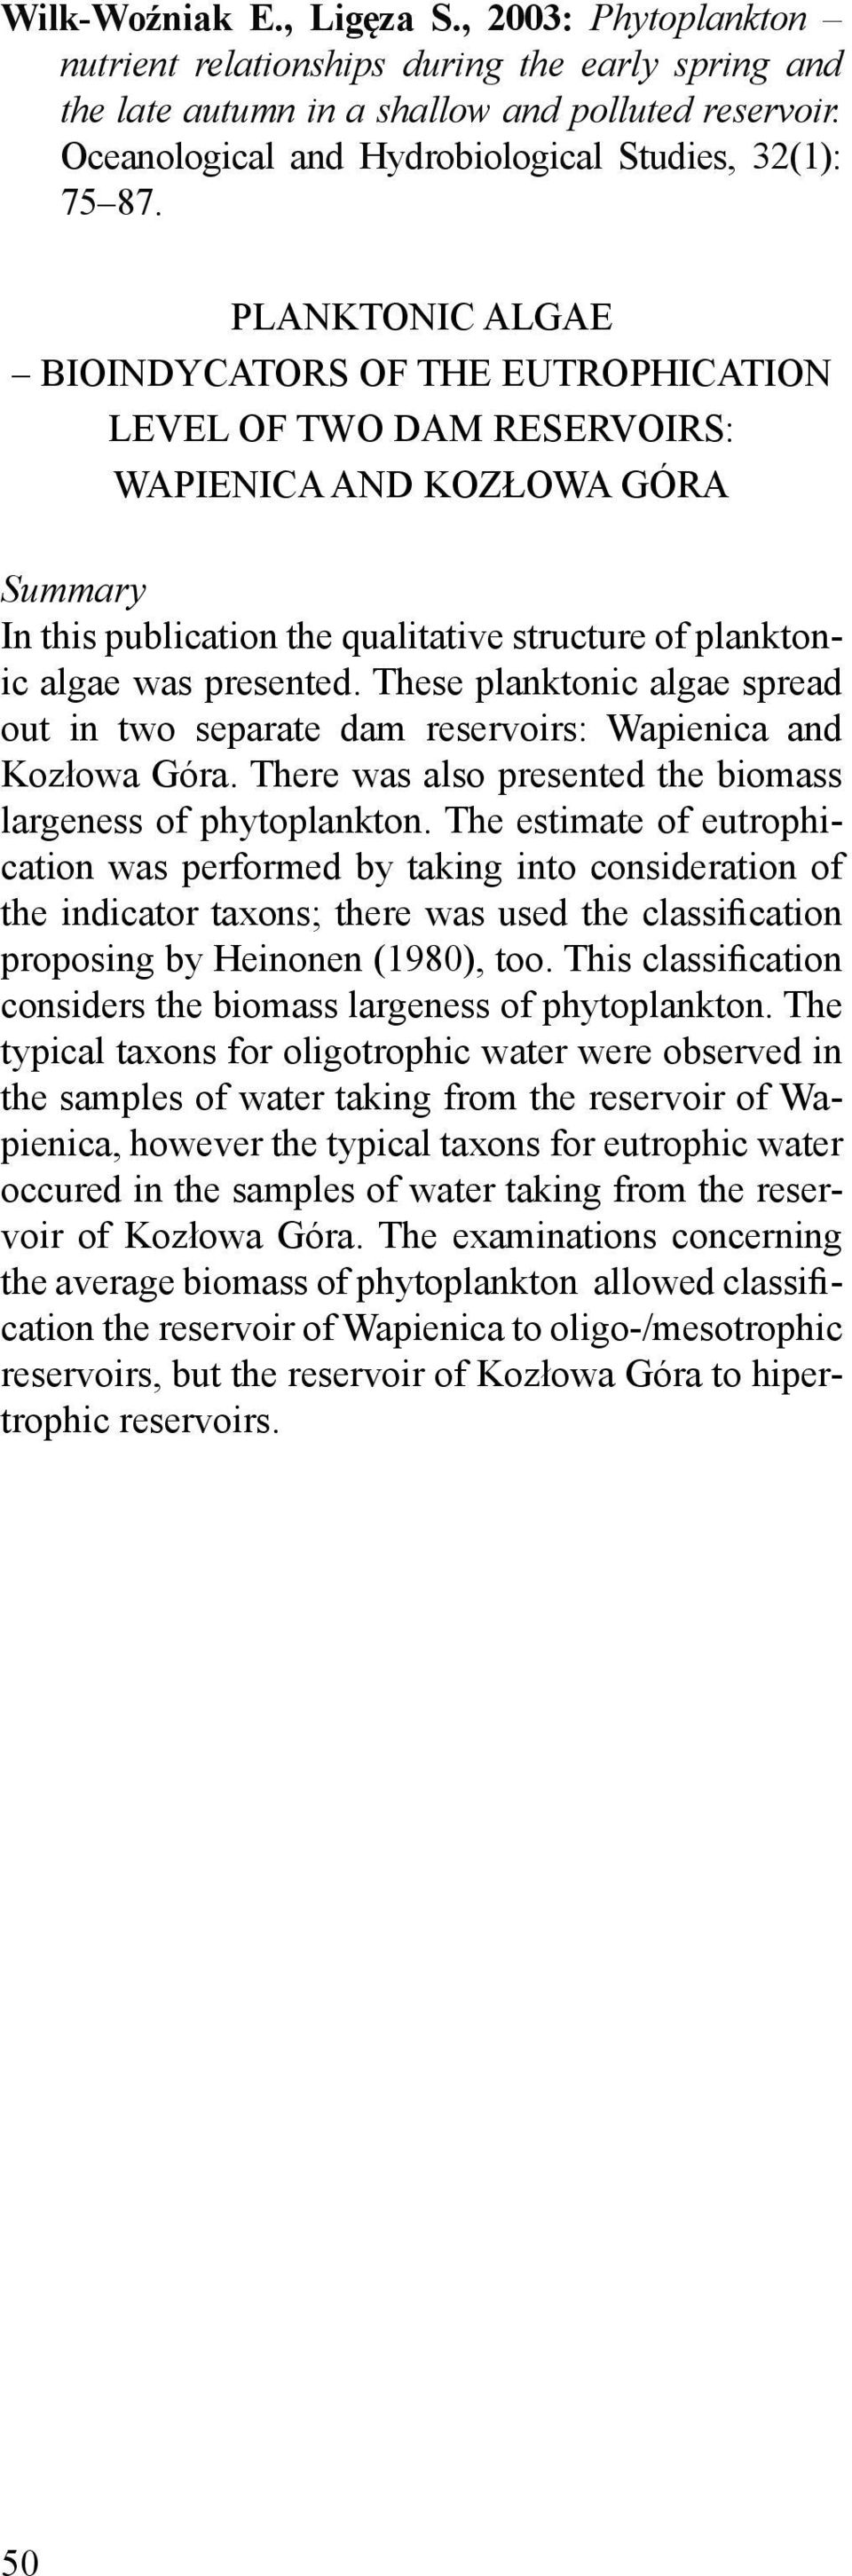 PLANKTONIC ALGAE BIOINDYCATORS OF THE EUTROPHICATION LEVEL OF TWO DAM RESERVOIRS: WAPIENICA AND KOZŁOWA GÓRA Summary In this publication the qualitative structure of planktonic algae was presented.